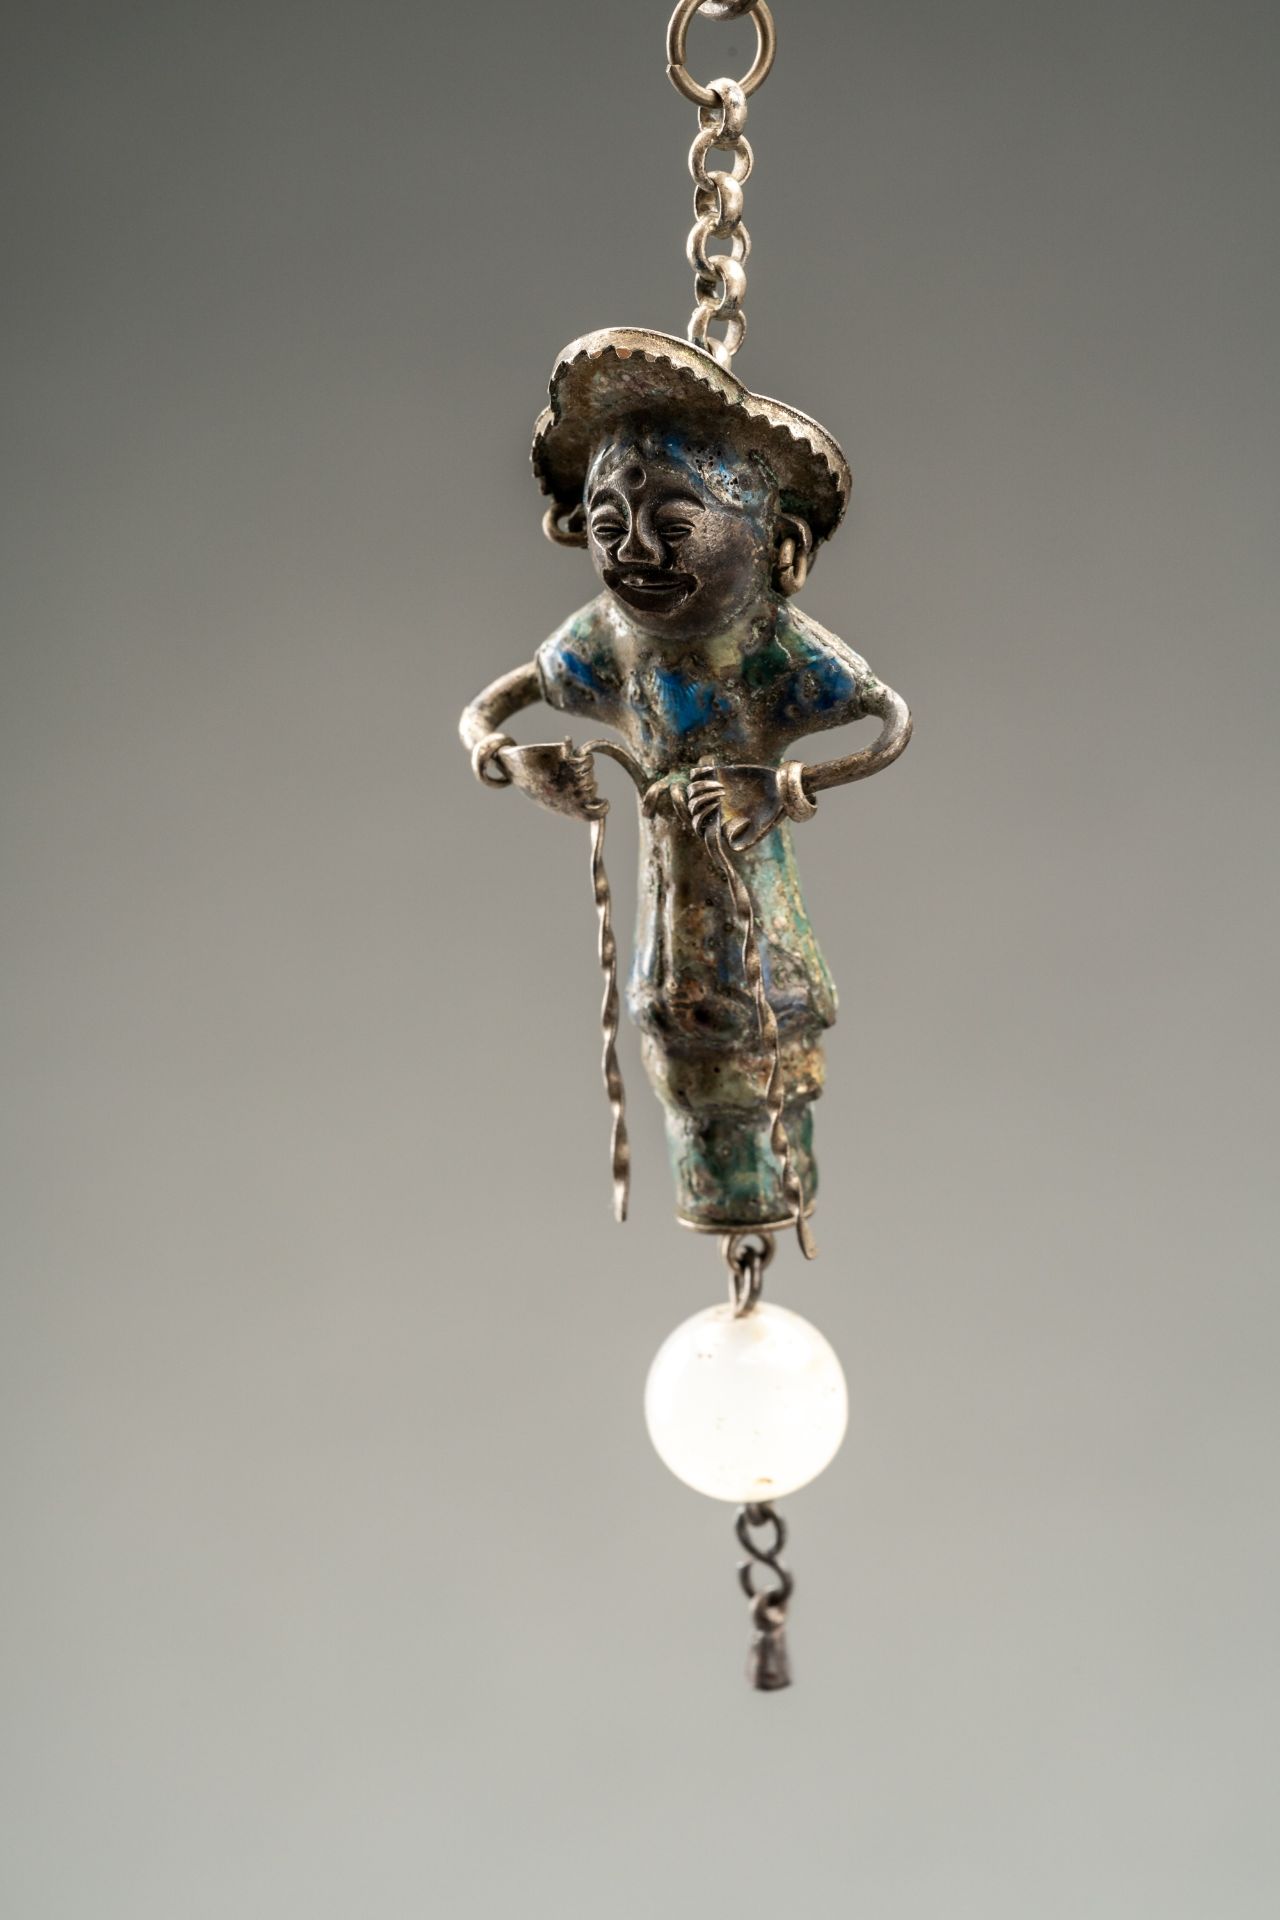 AN ENAMELED SILVER NEEDLE HOLDER, 17th CENTURY